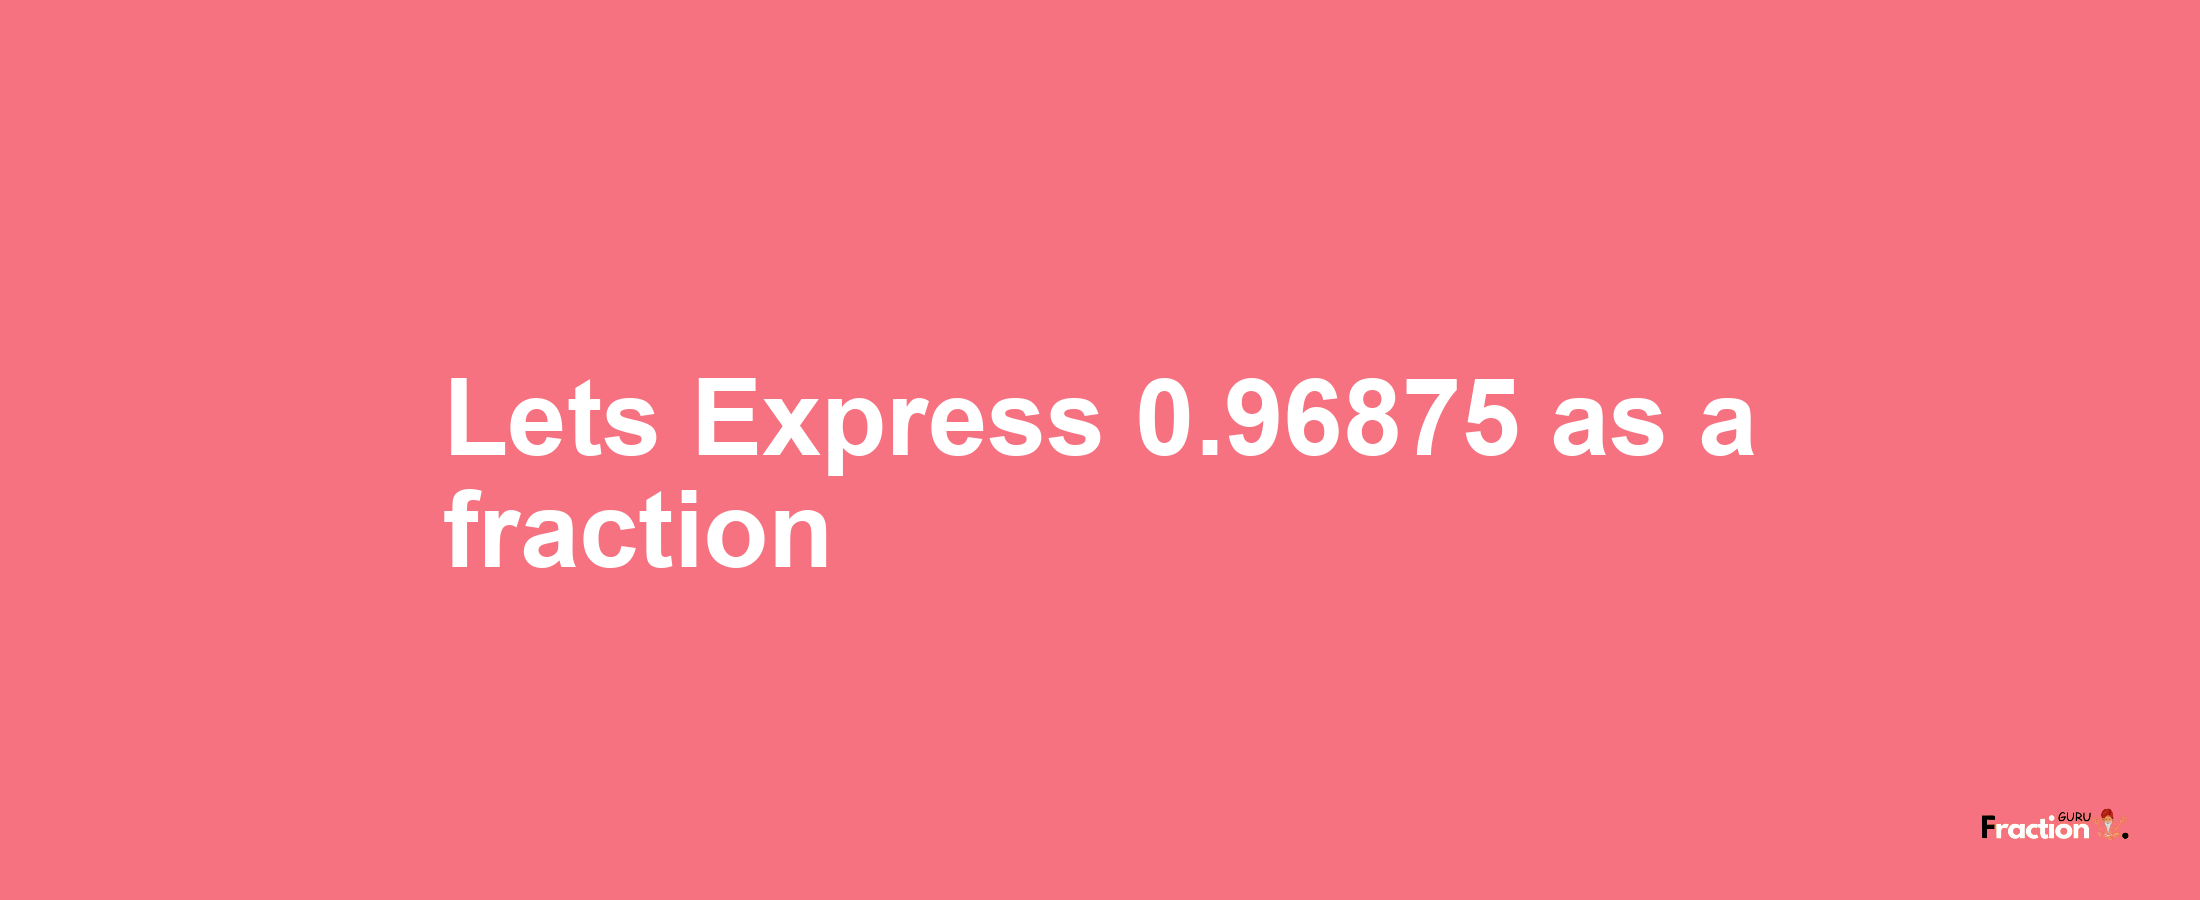 Lets Express 0.96875 as afraction